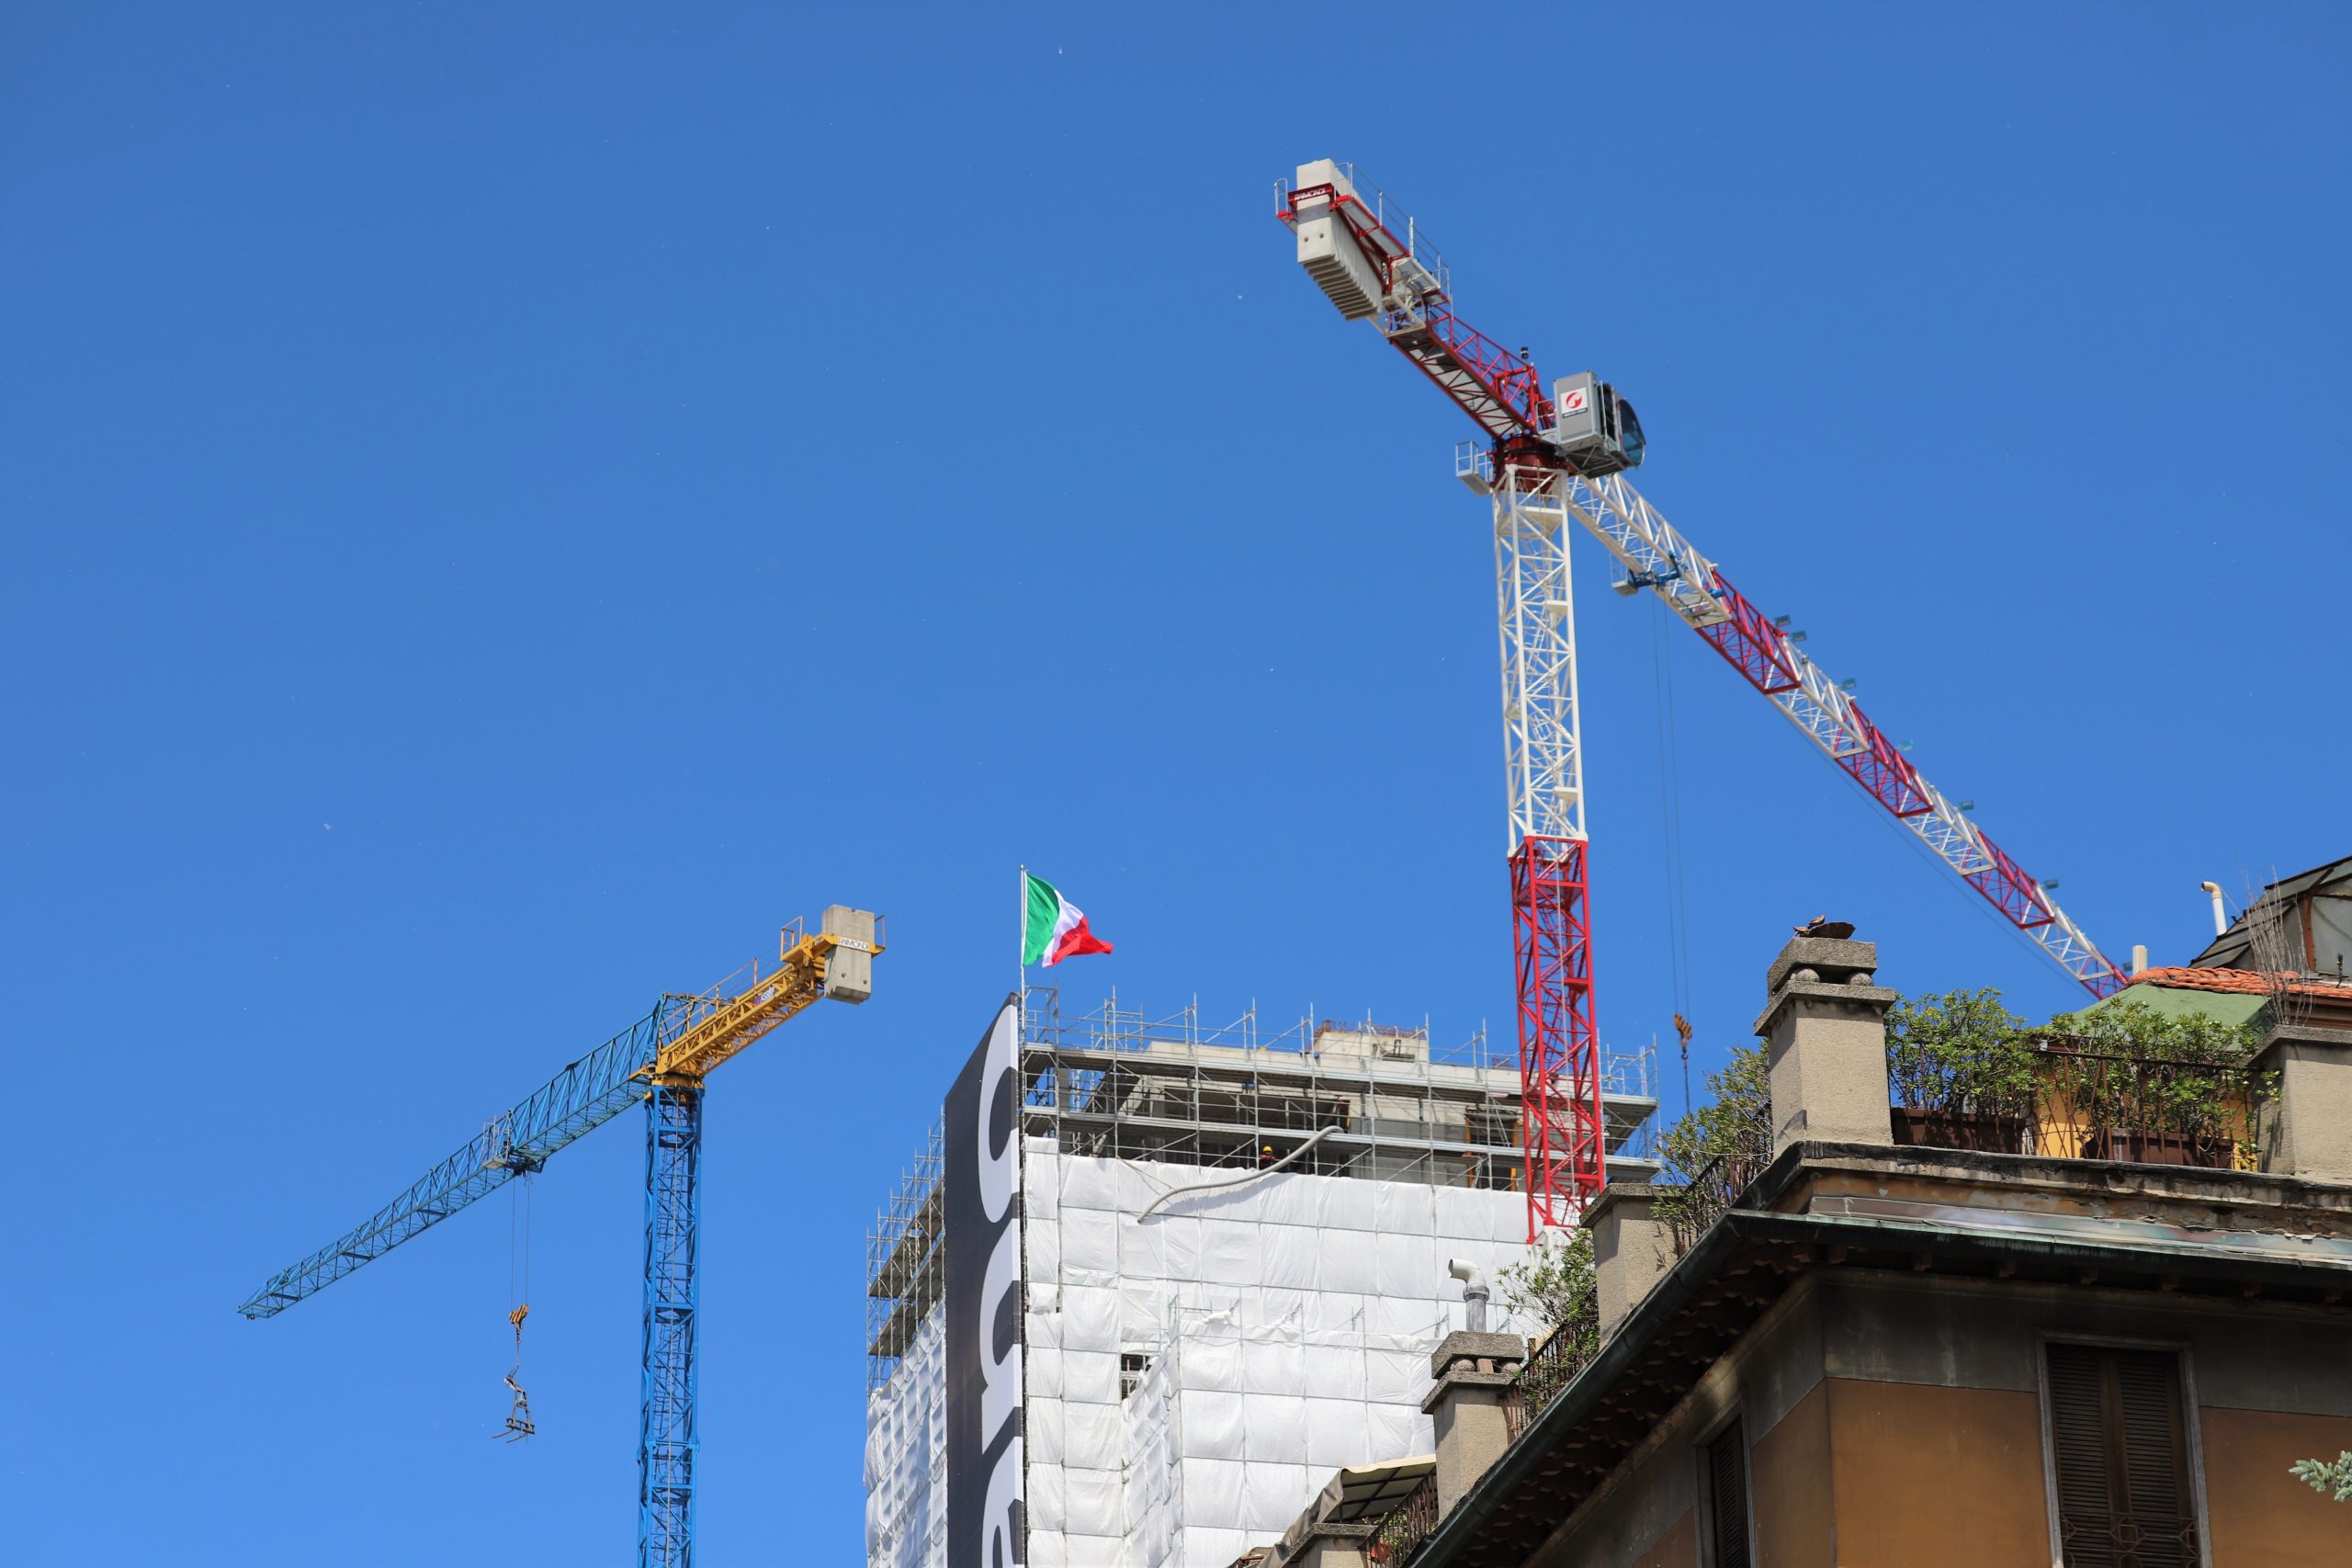 Assistedile installs two Raimondi flat-top tower cranes for Milan’s newest residential tower